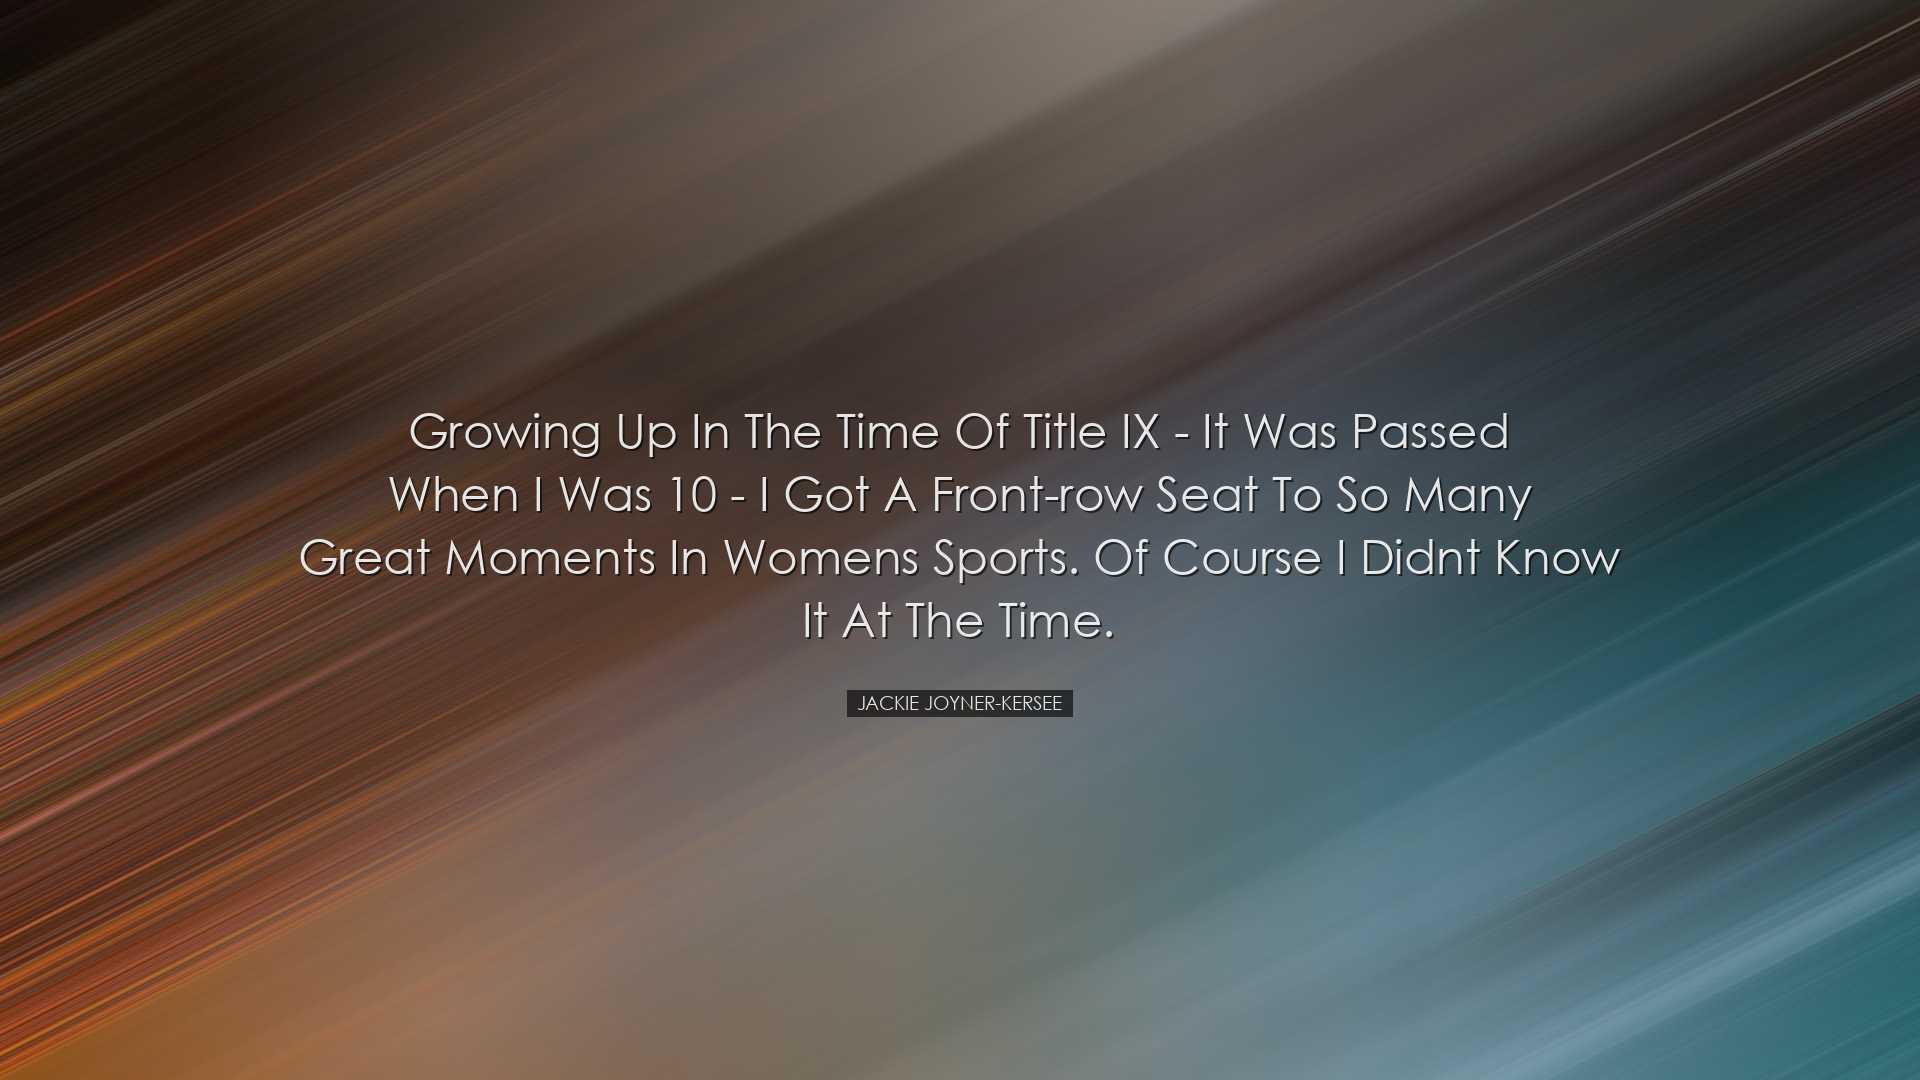 Growing up in the time of Title IX - it was passed when I was 10 -